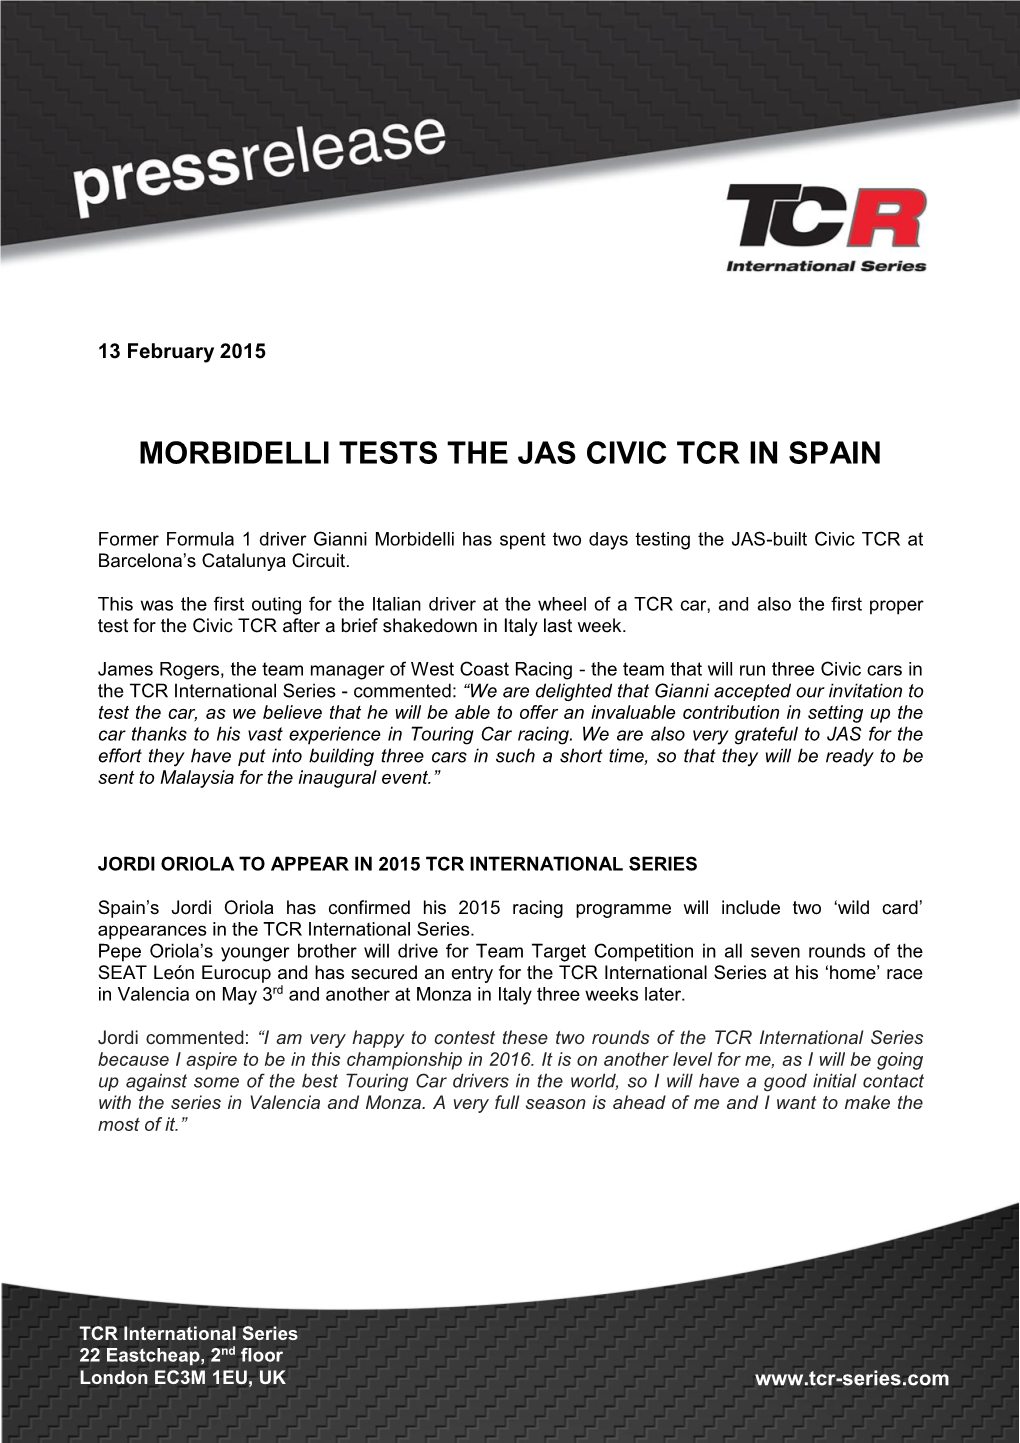 Morbidelli Tests the Jas Civic Tcr in Spain